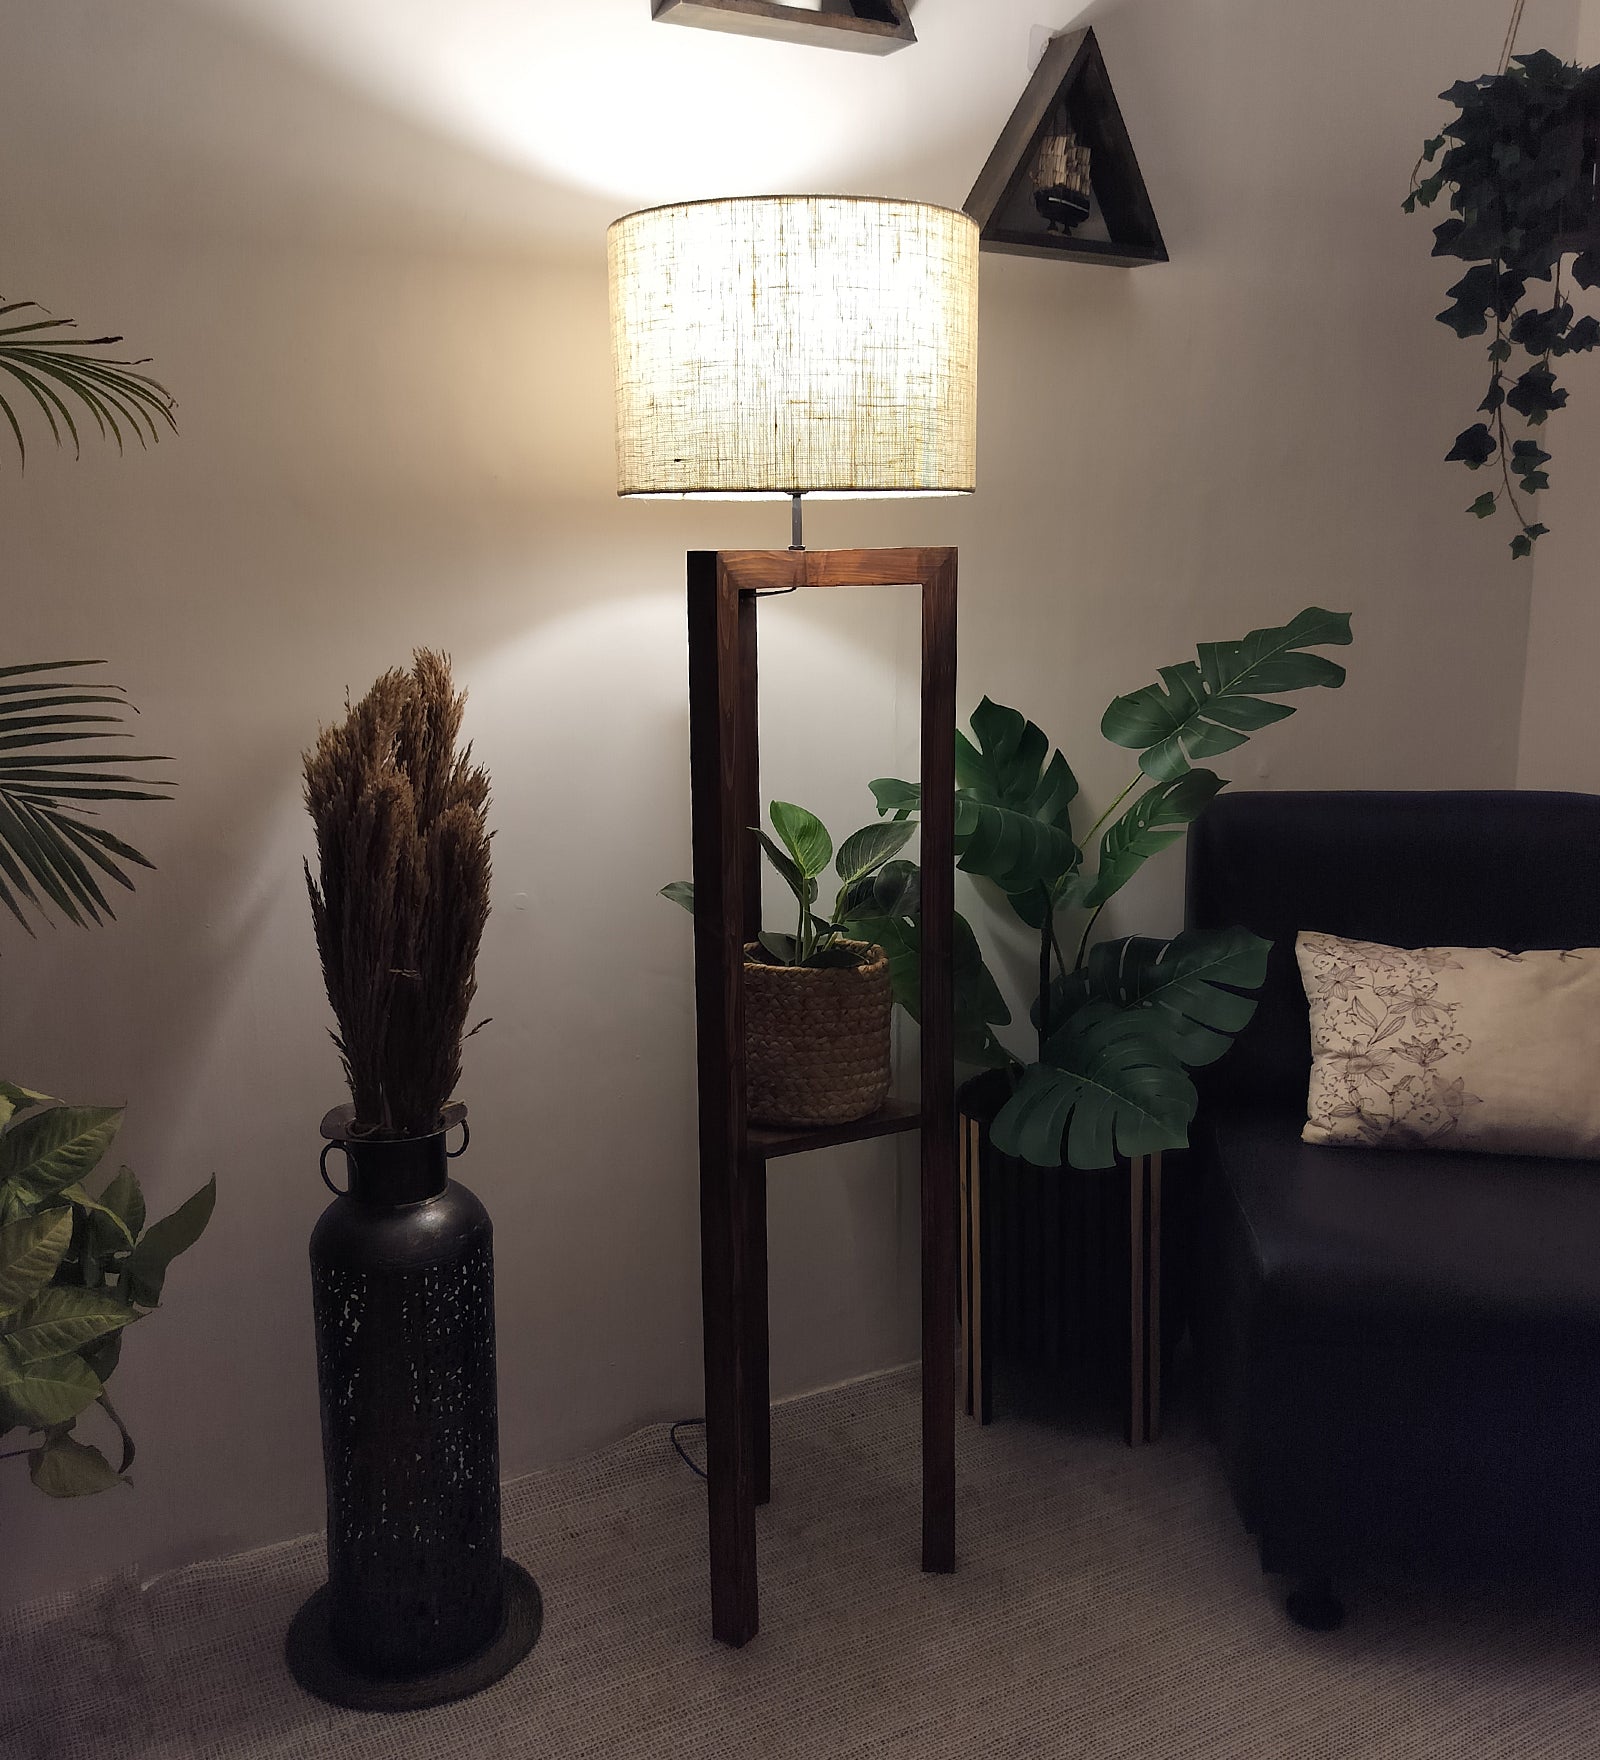 Triad Wooden Floor Lamp with Brown Base and Beige Fabric Lampshade (BULB NOT INCLUDED)